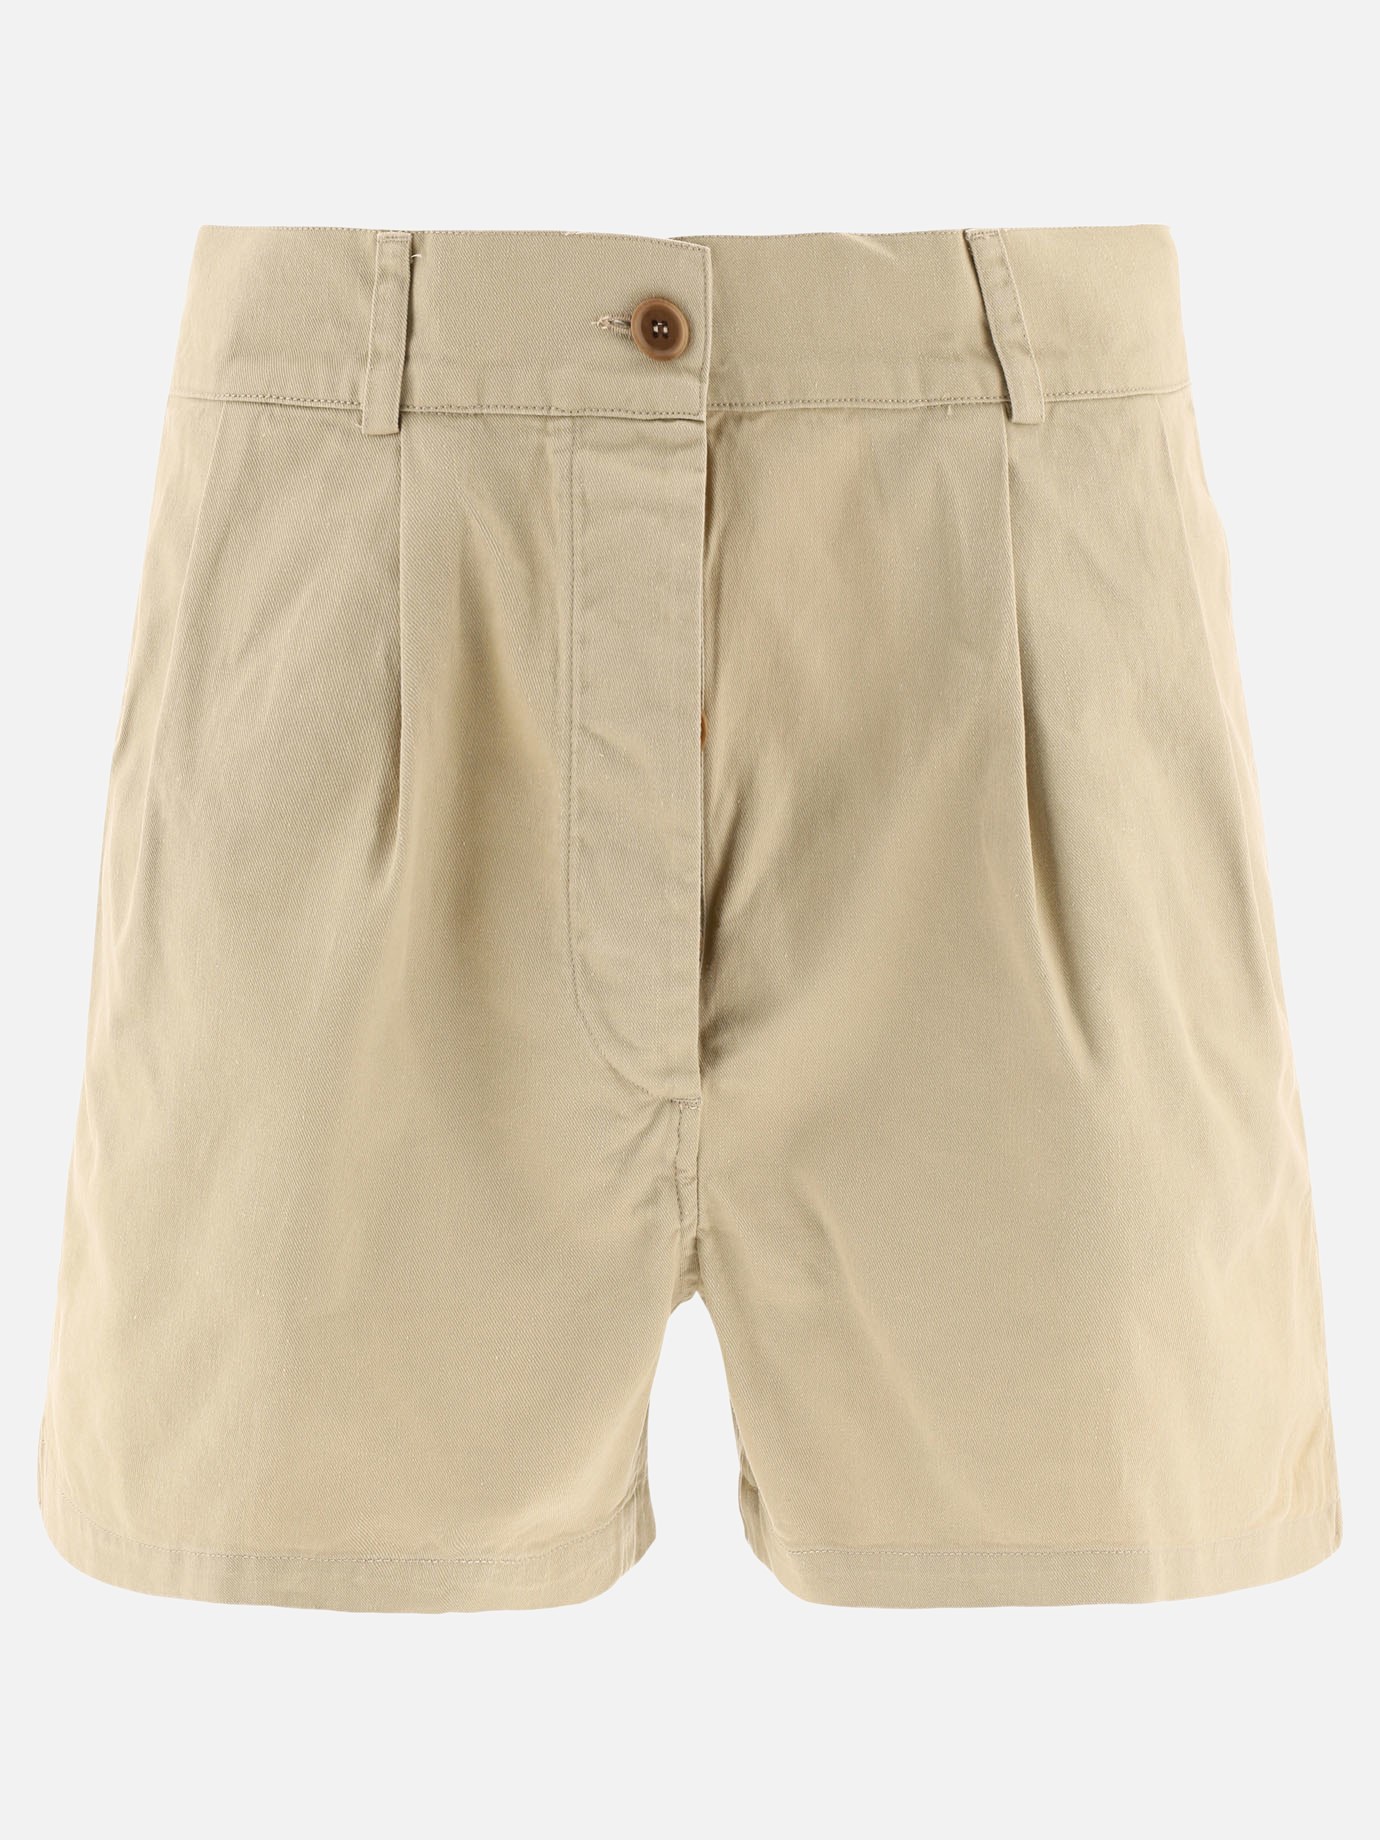 Tailored shorts